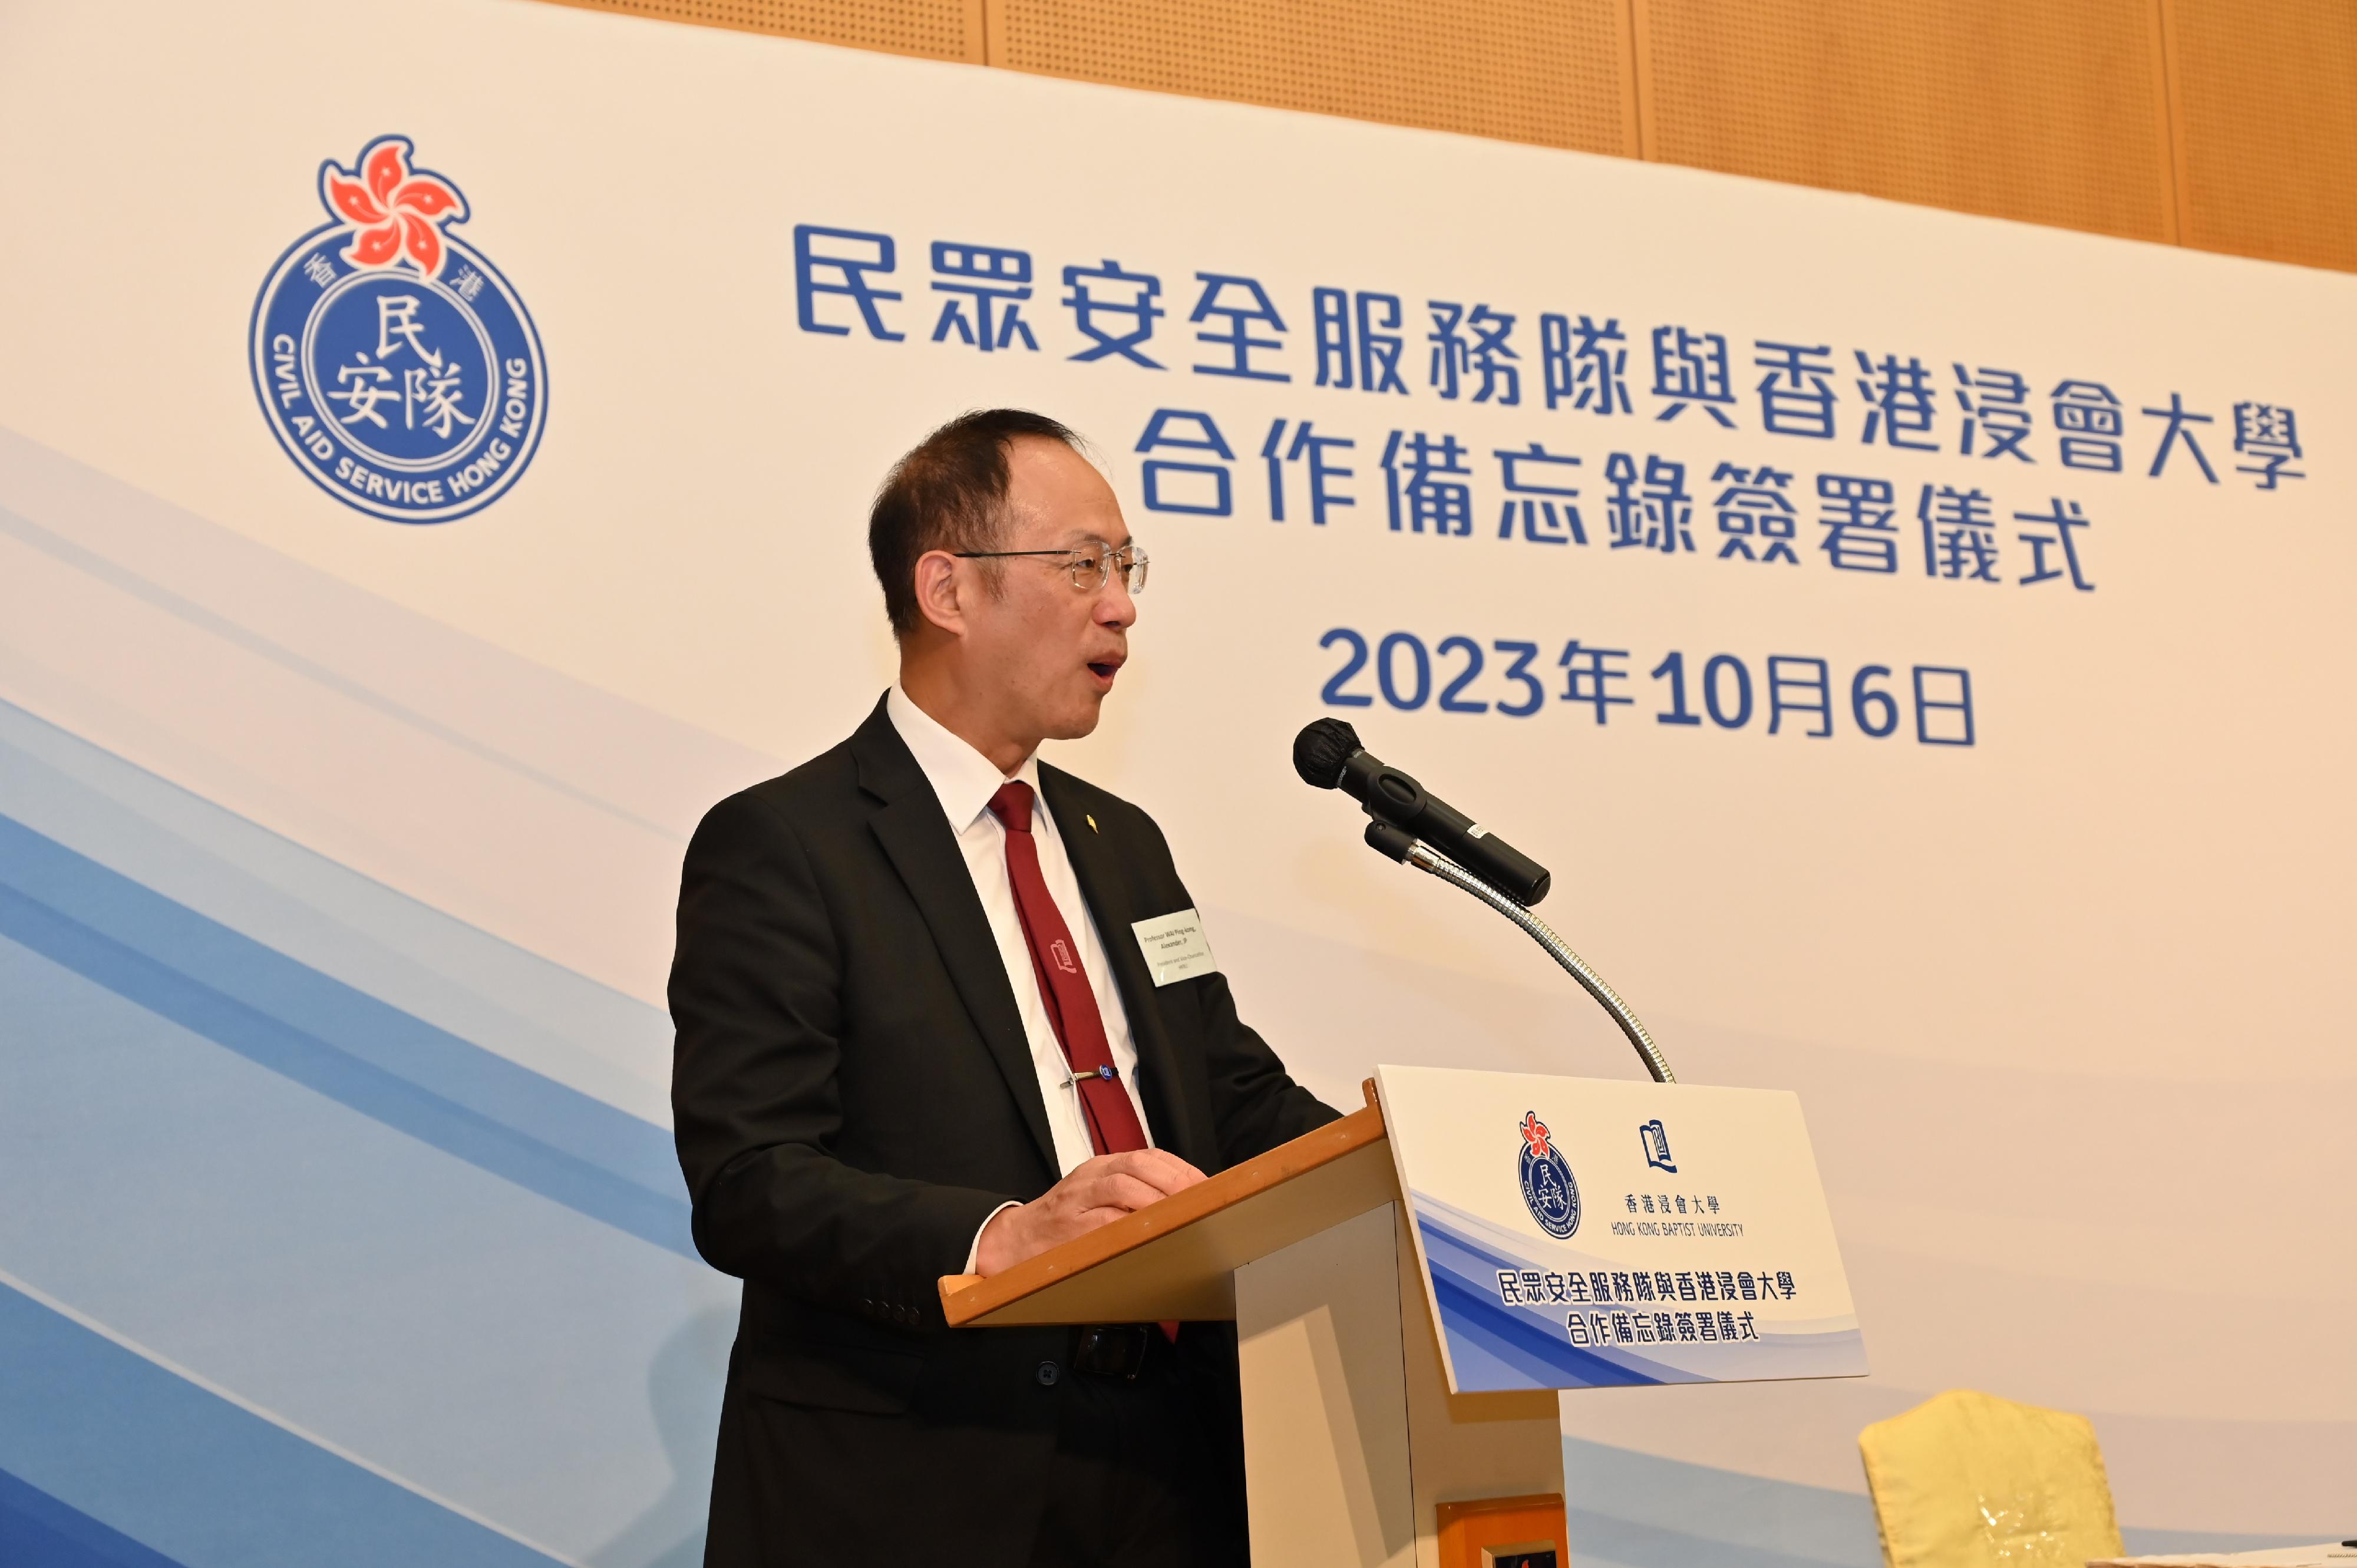 The Civil Aid Service (CAS) and the Hong Kong Baptist University (HKBU) signed a Memorandum of Understanding today (October 6) to underpin a closer collaboration. Photo shows the President and Vice-Chancellor of HKBU, Professor Alexander Wai, delivering a speech at the signing ceremony.